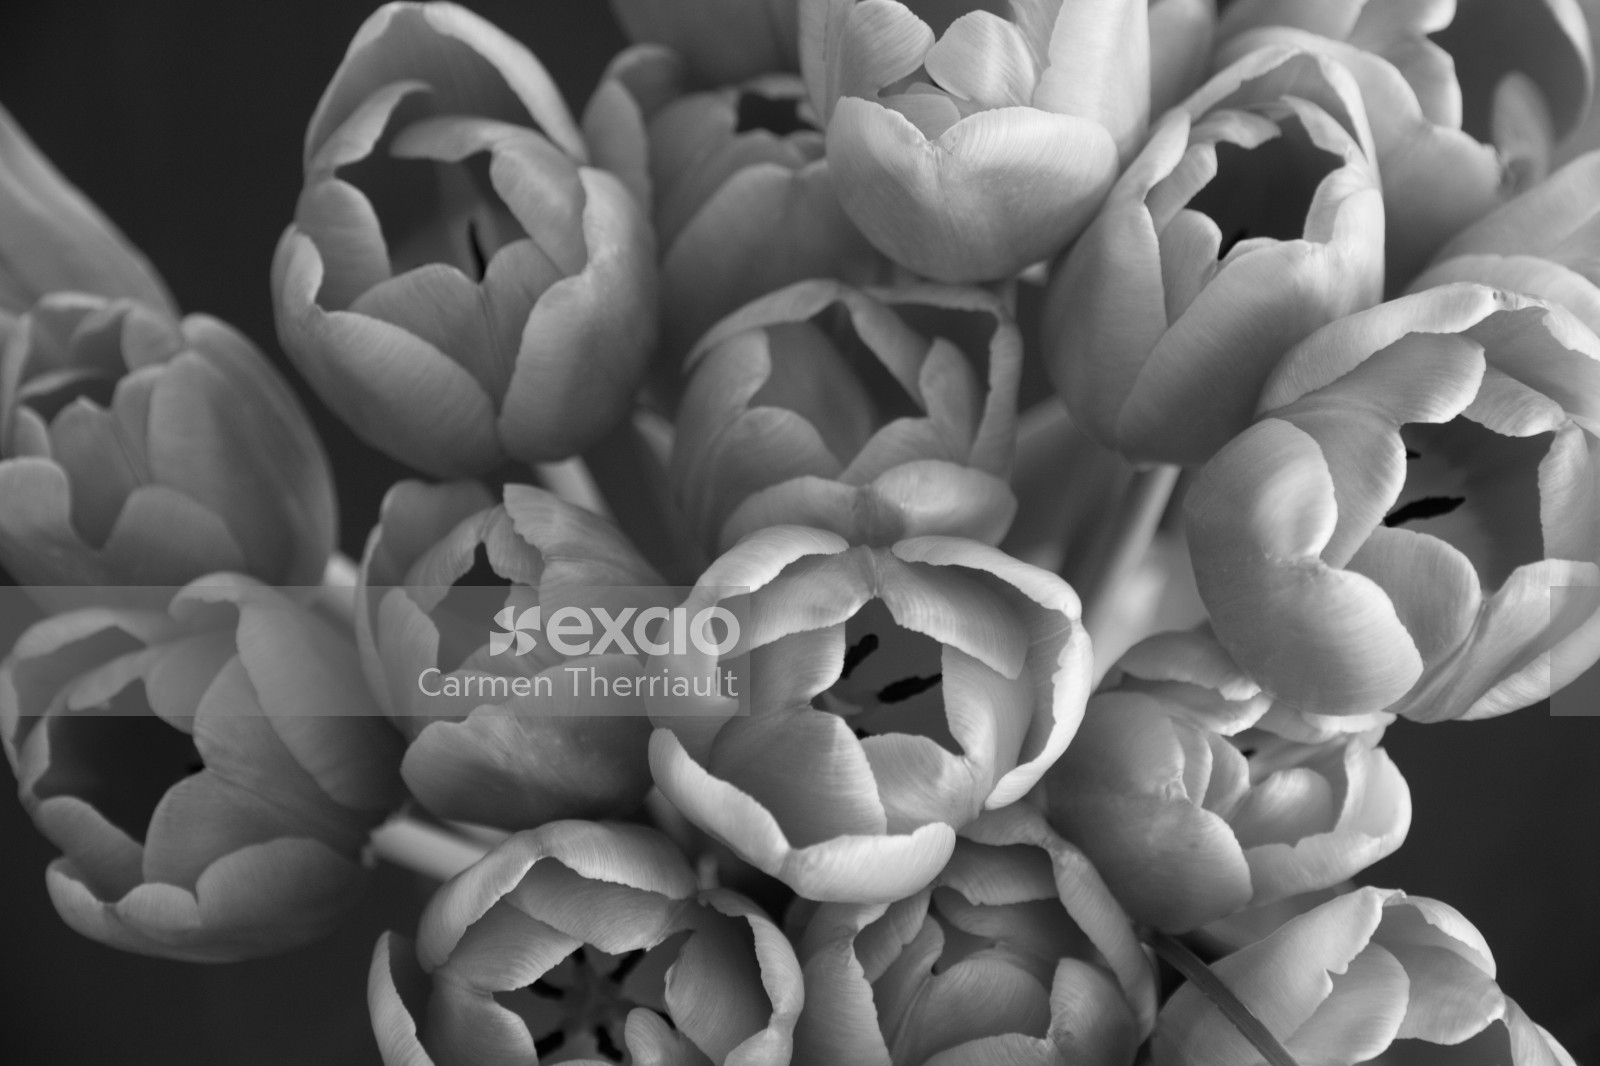 Tulips in Black and White